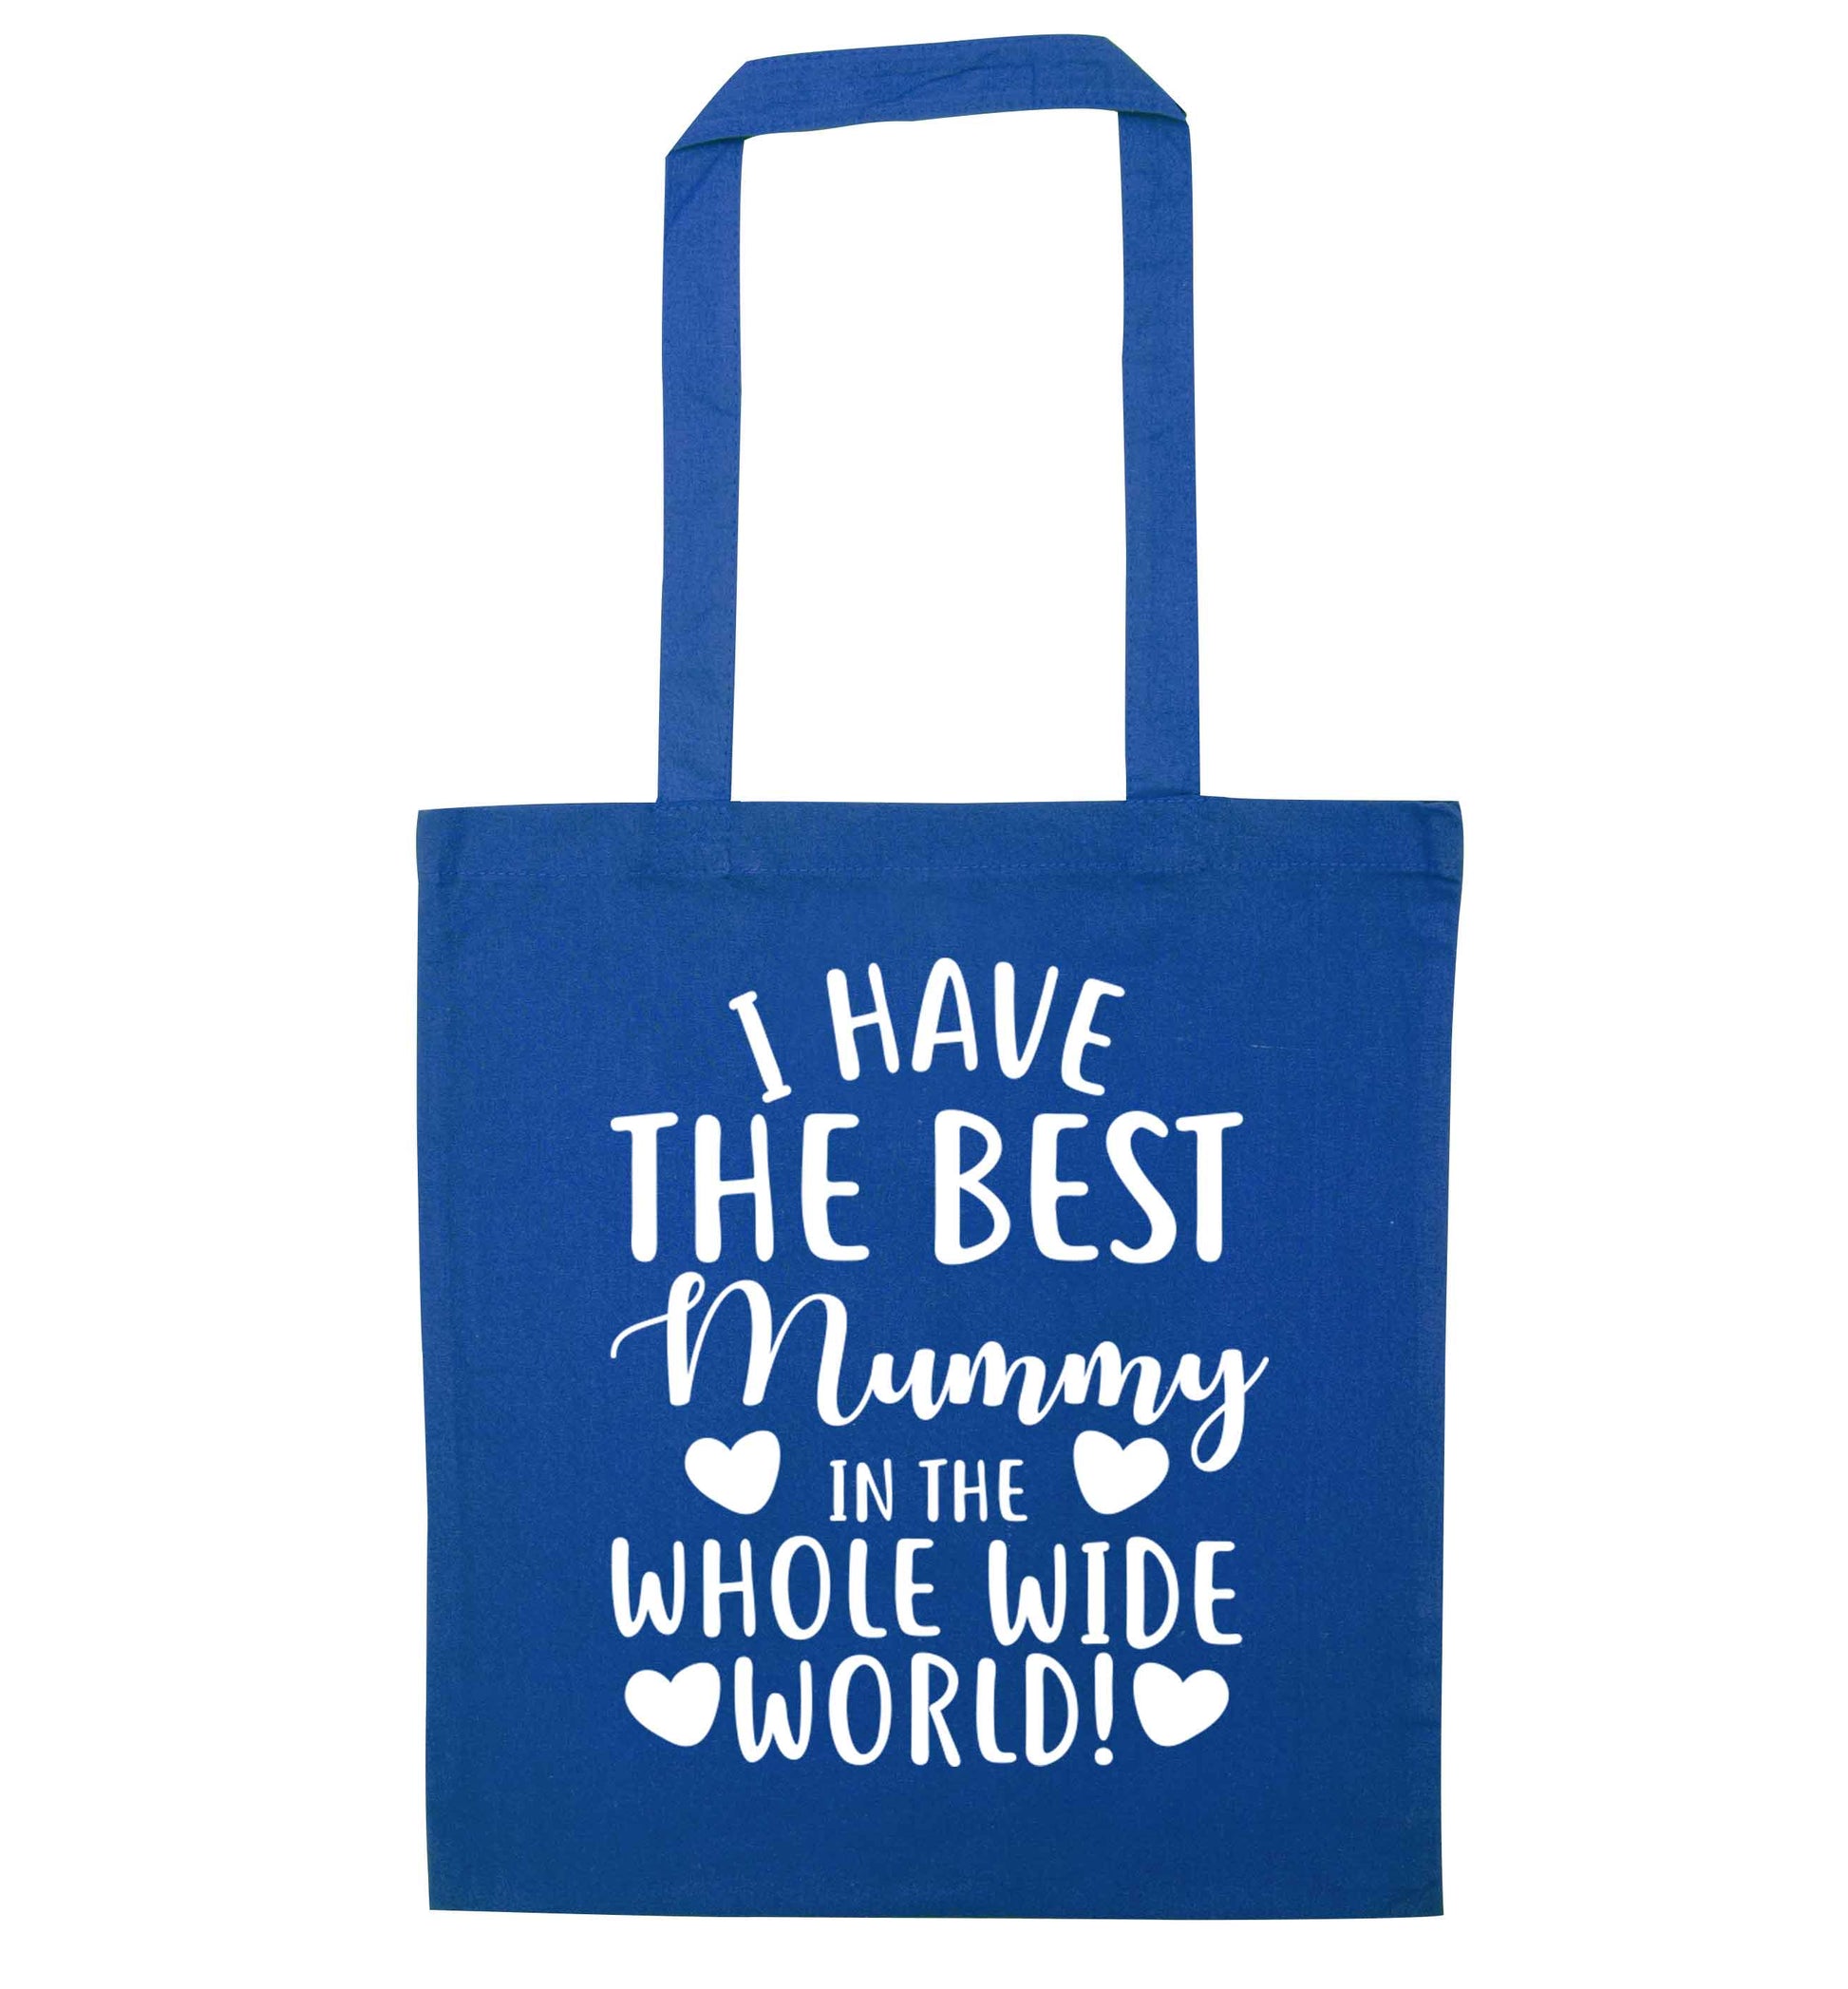 I have the best mummy in the whole wide world blue tote bag